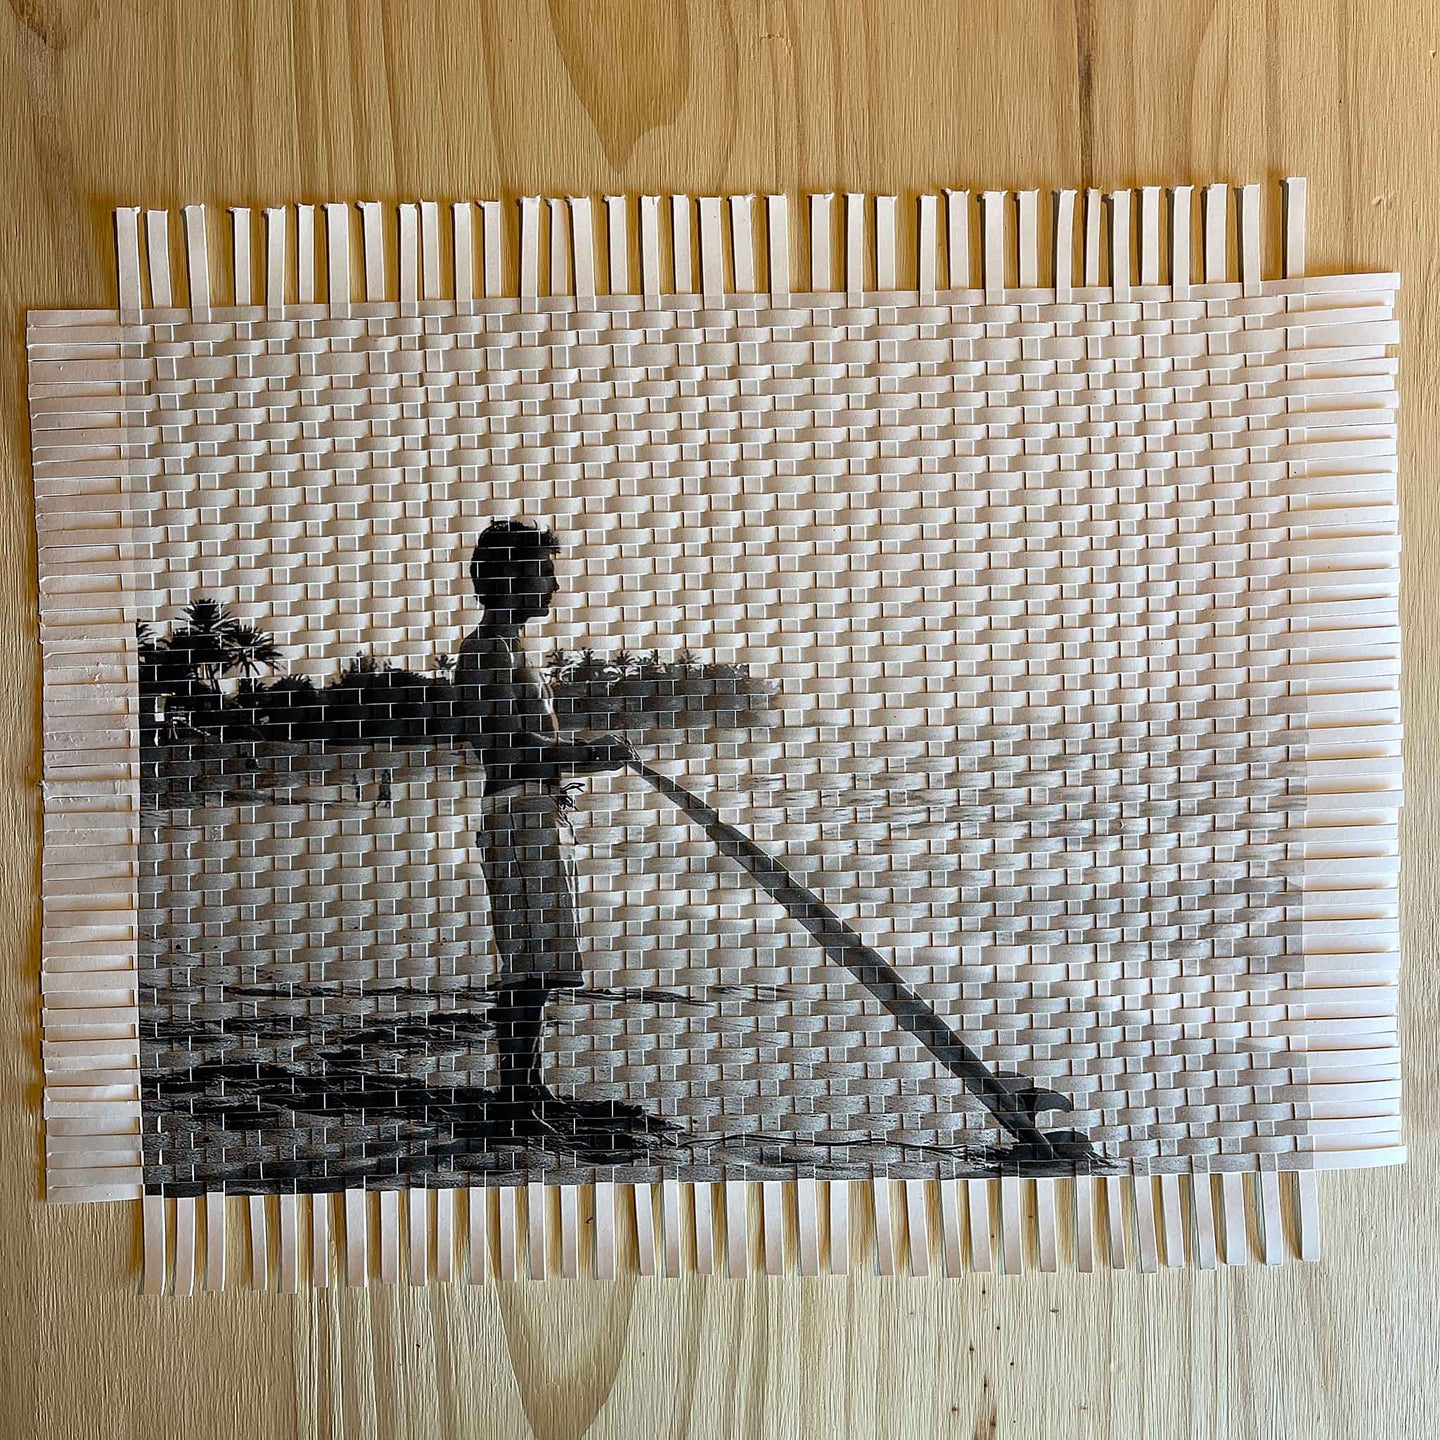 FERNANDO SURFER WOVEN PHOTO 11 x 14 - AVAILABLE NOW